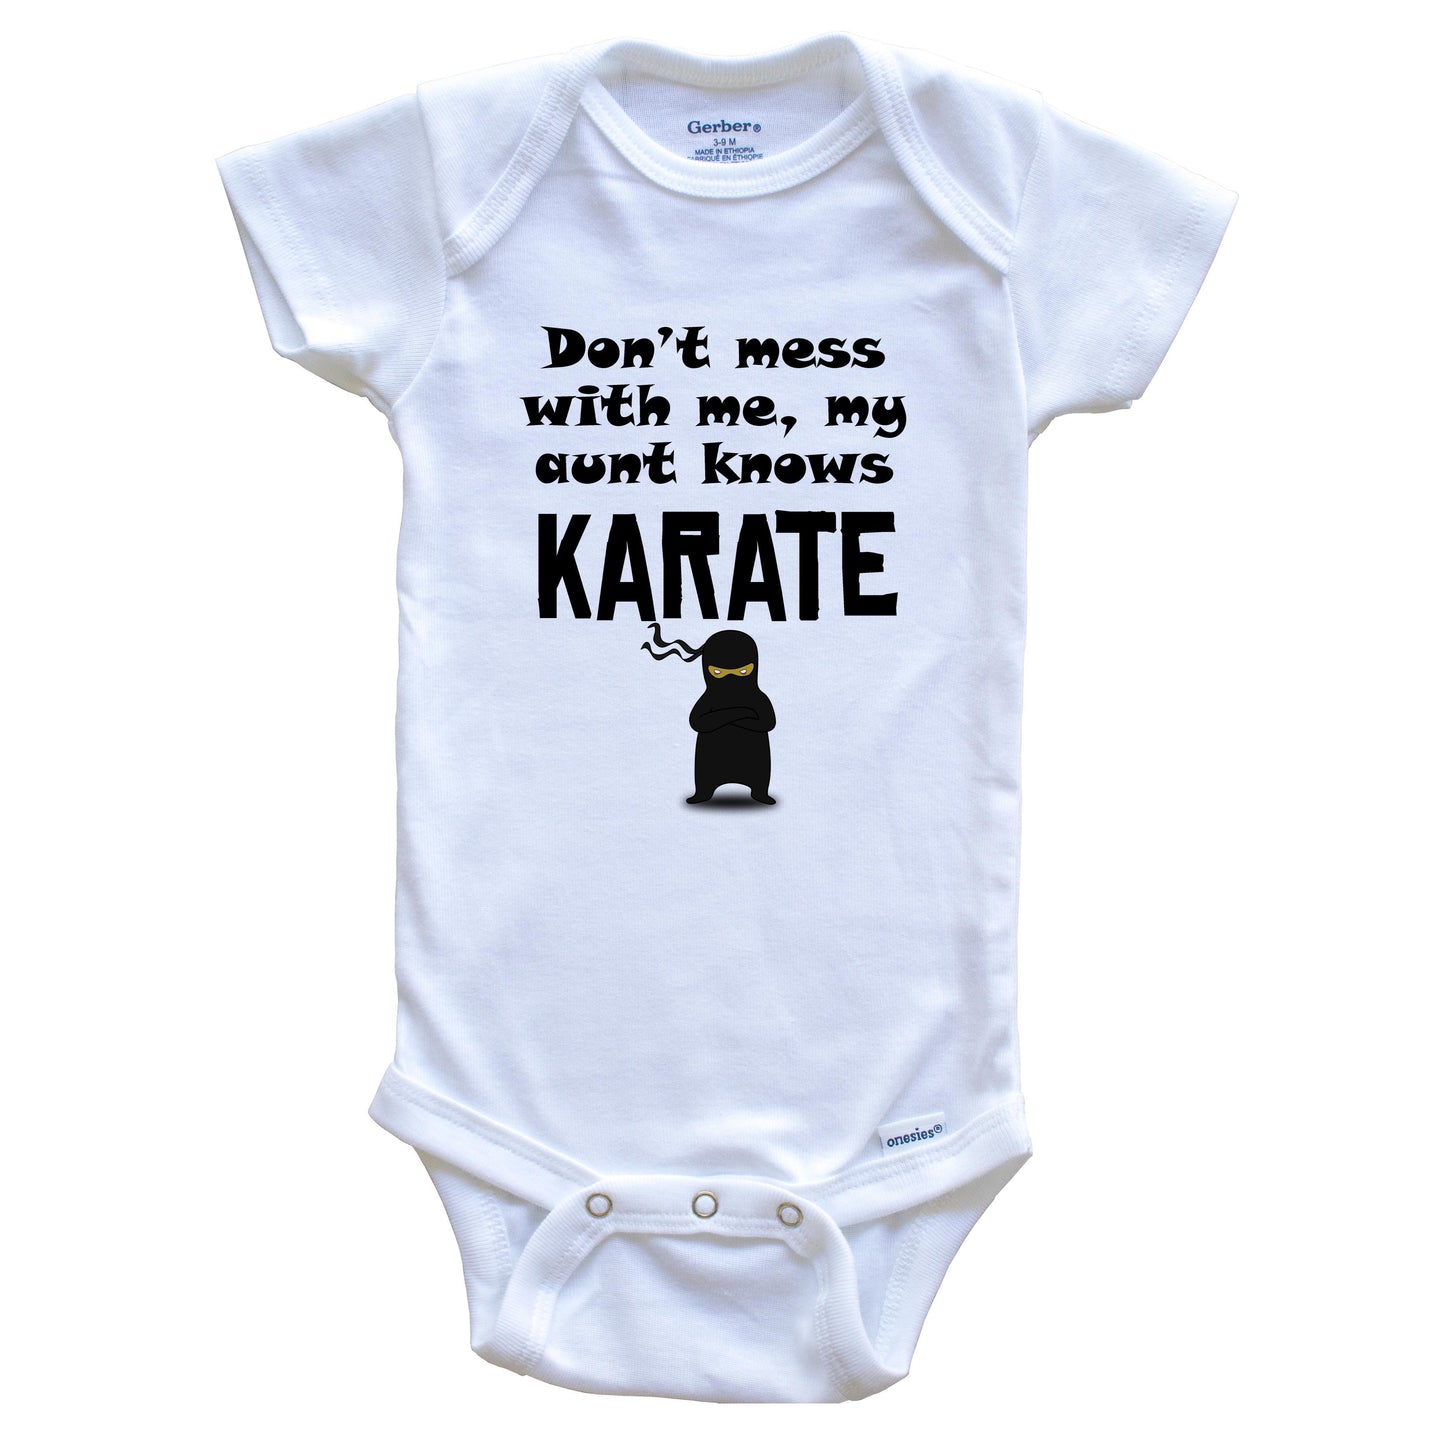 Don't Mess With Me My Aunt Knows Karate Funny Niece Nephew Baby Onesie